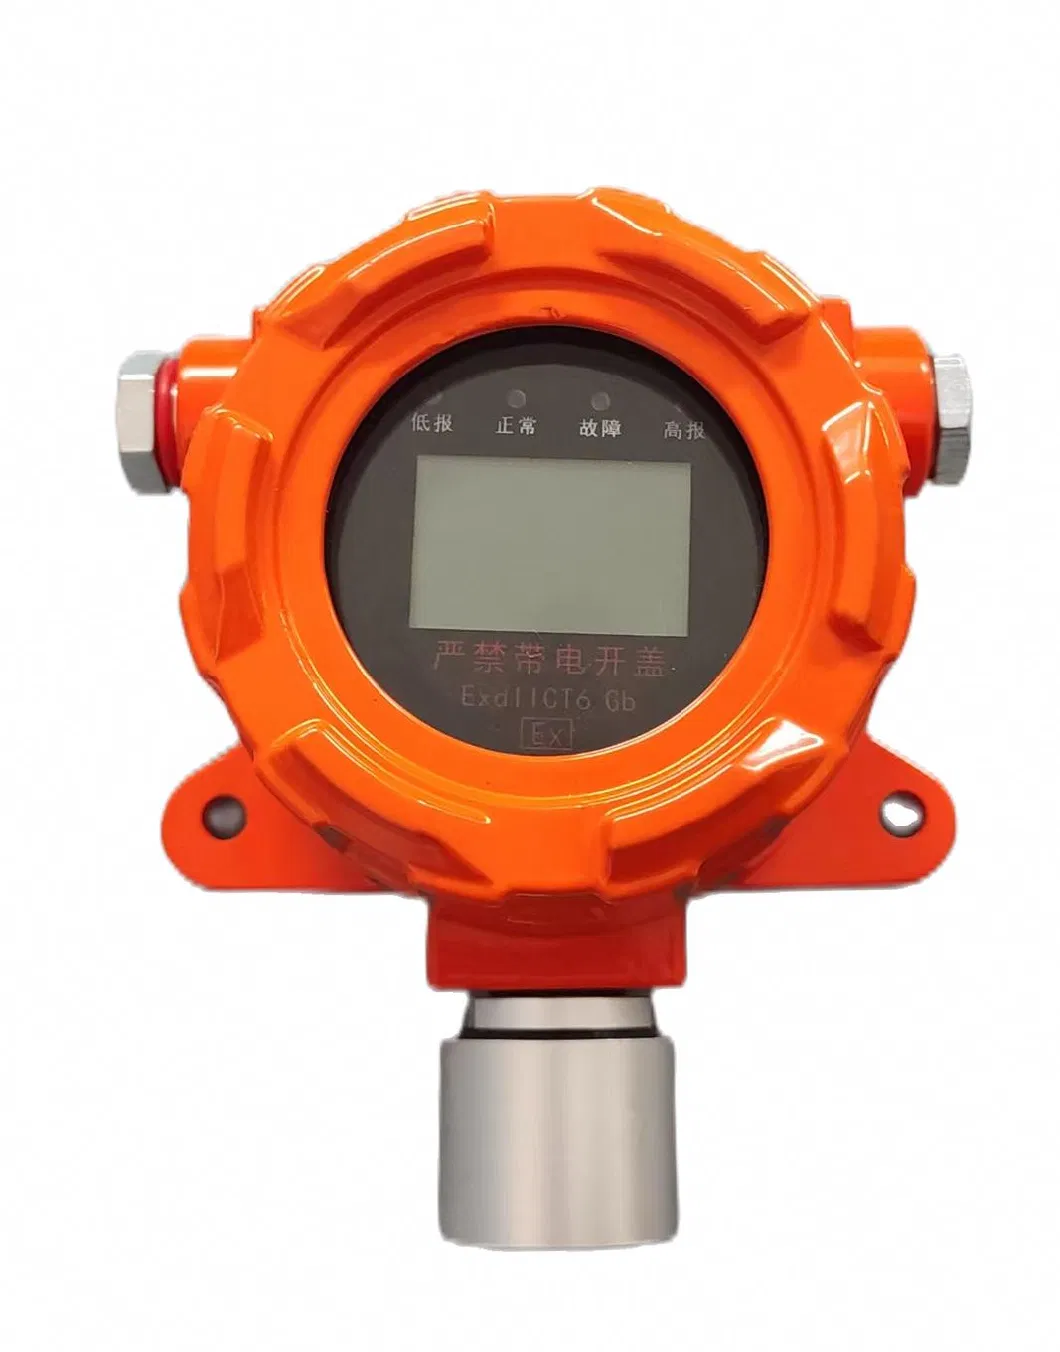 Oc-F08 Fixed Gas Monitor with Audible-Visual Alarm Combustible Gas Transmitter